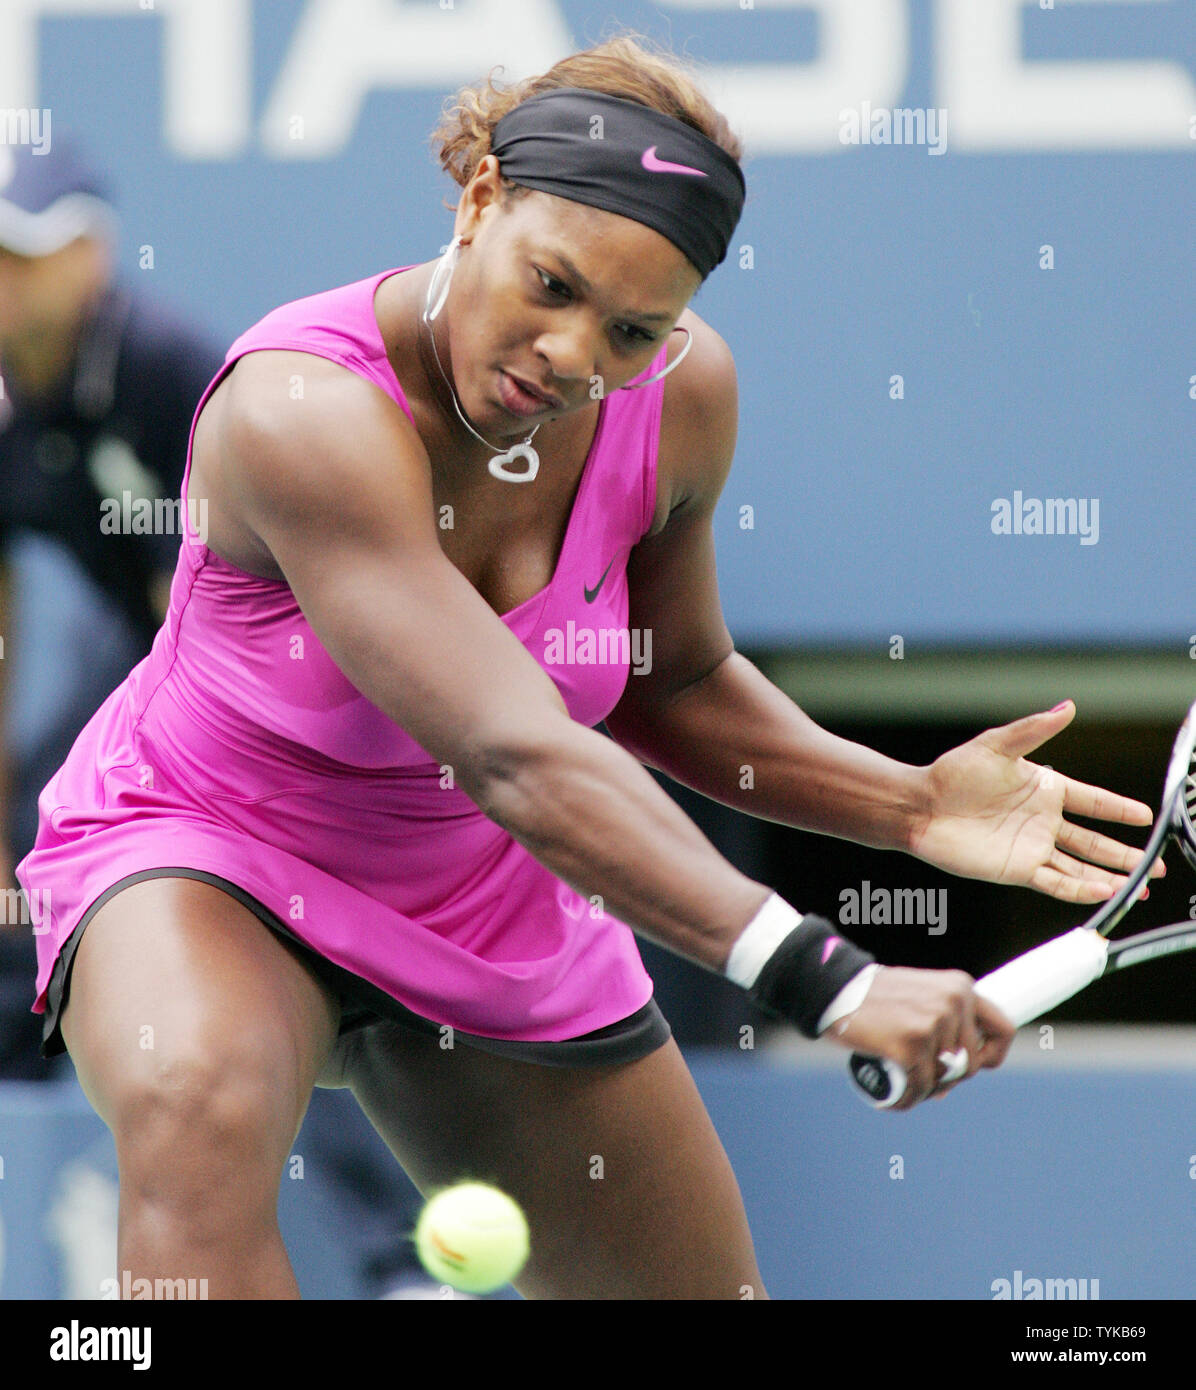 US Open champion Serena Williams takes on Alexa Glatch (USA) during  first-round play of the US Open tennis championship on August 31, 2009 in  New York. UPI /Monika Graff Stock Photo - Alamy